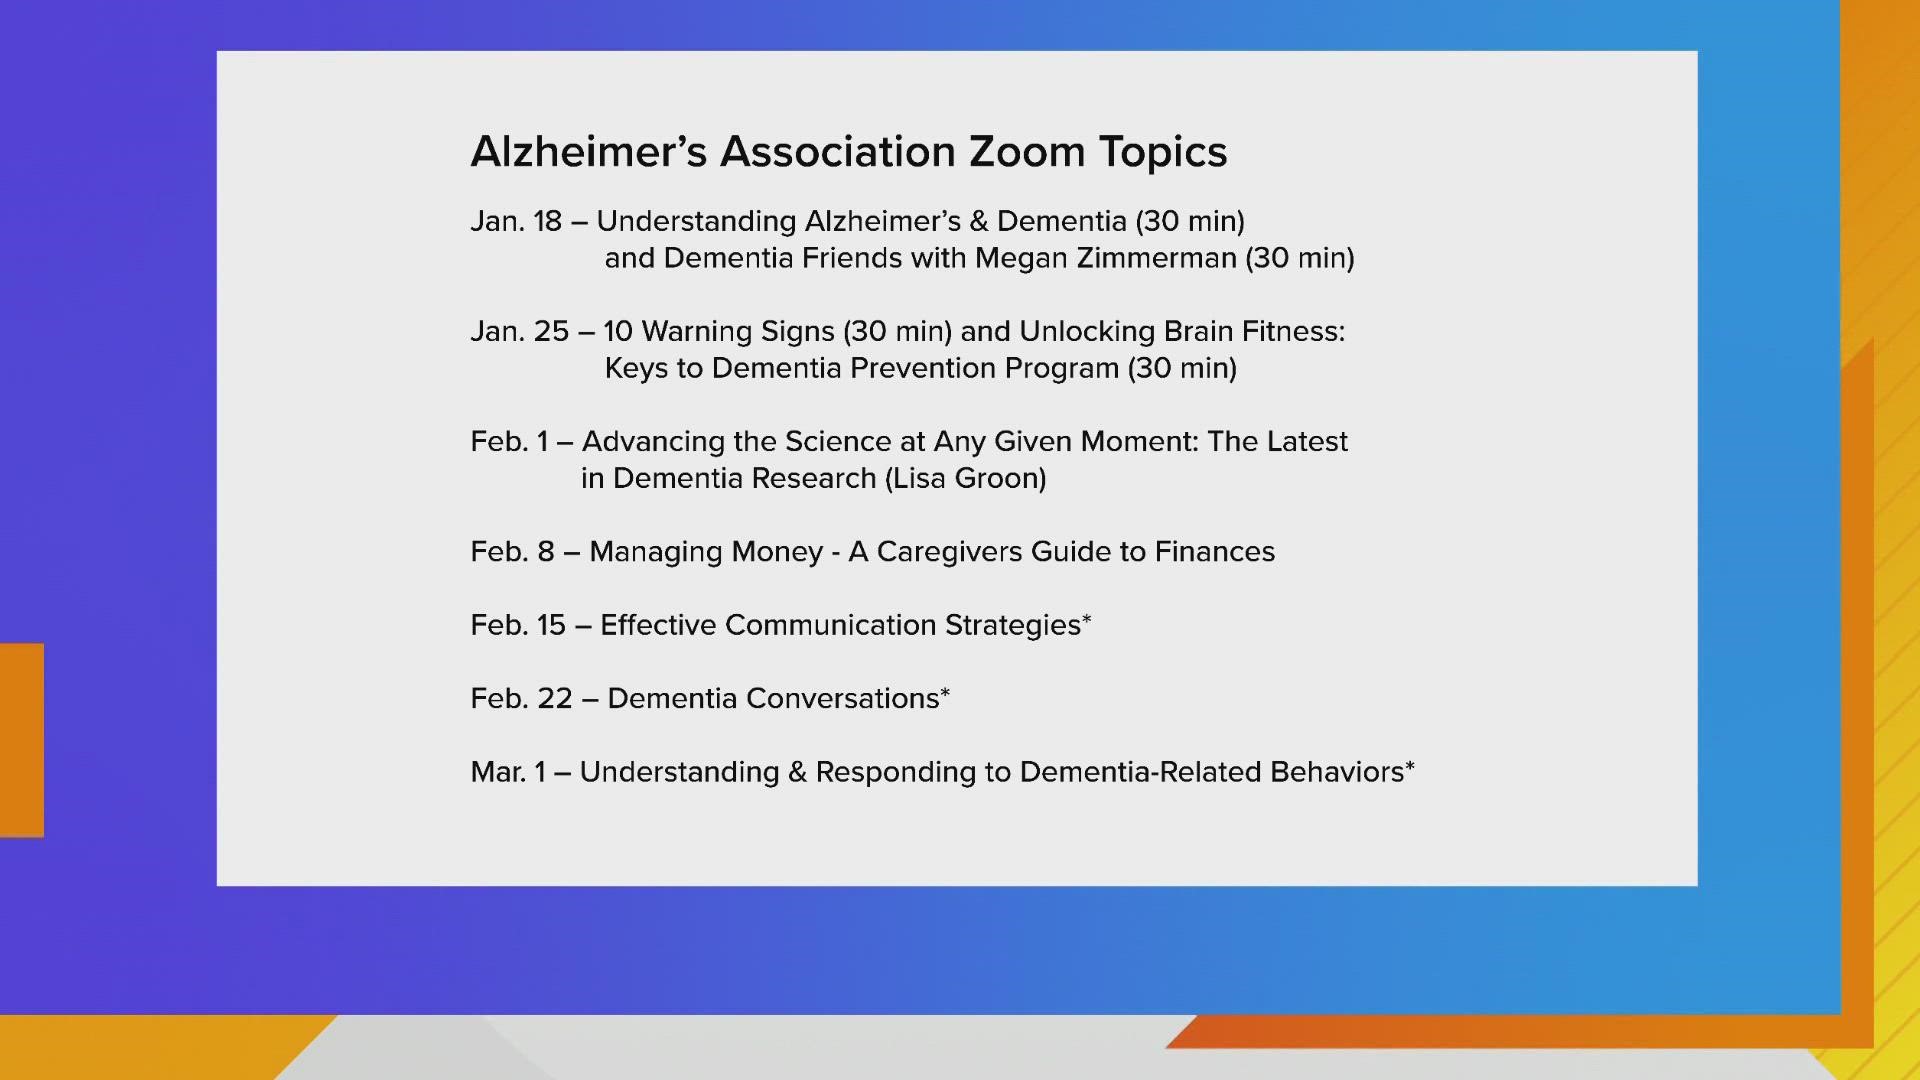 Megan Benzing, Program Manager-Alzheimer's Association Iowa Chapter, has information on the weekly Winter Education Series on the disease that starts January 18th.